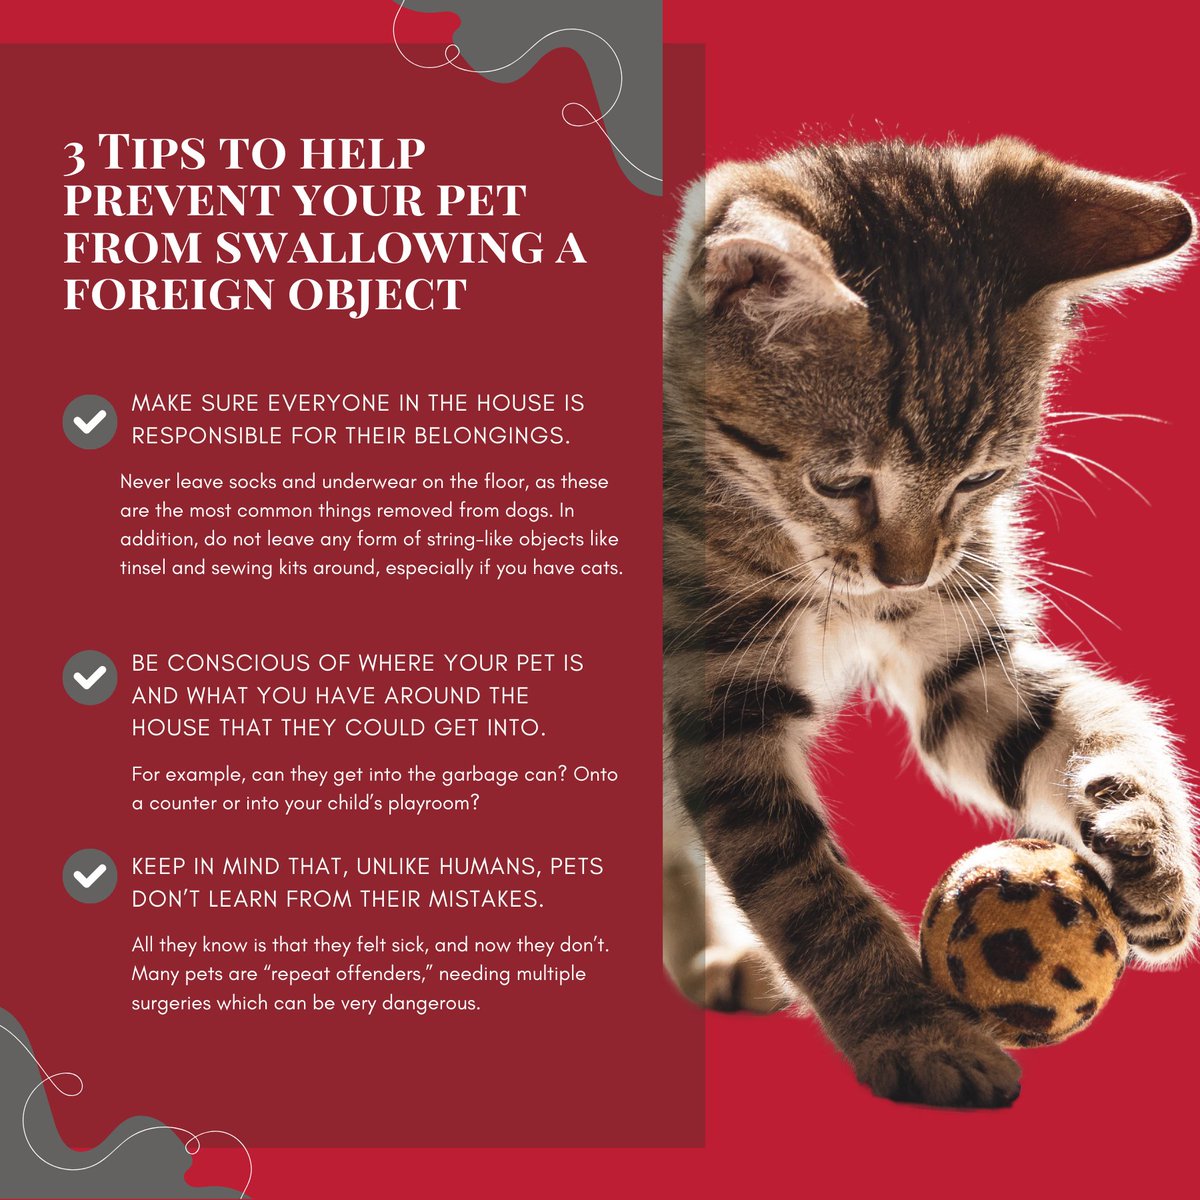 Prevent pet emergencies before they happen! 🚫🐾 Keep your furry friend safe by following these simple tips to avoid accidental ingestion of foreign objects. #PetSafety #PreventionTips